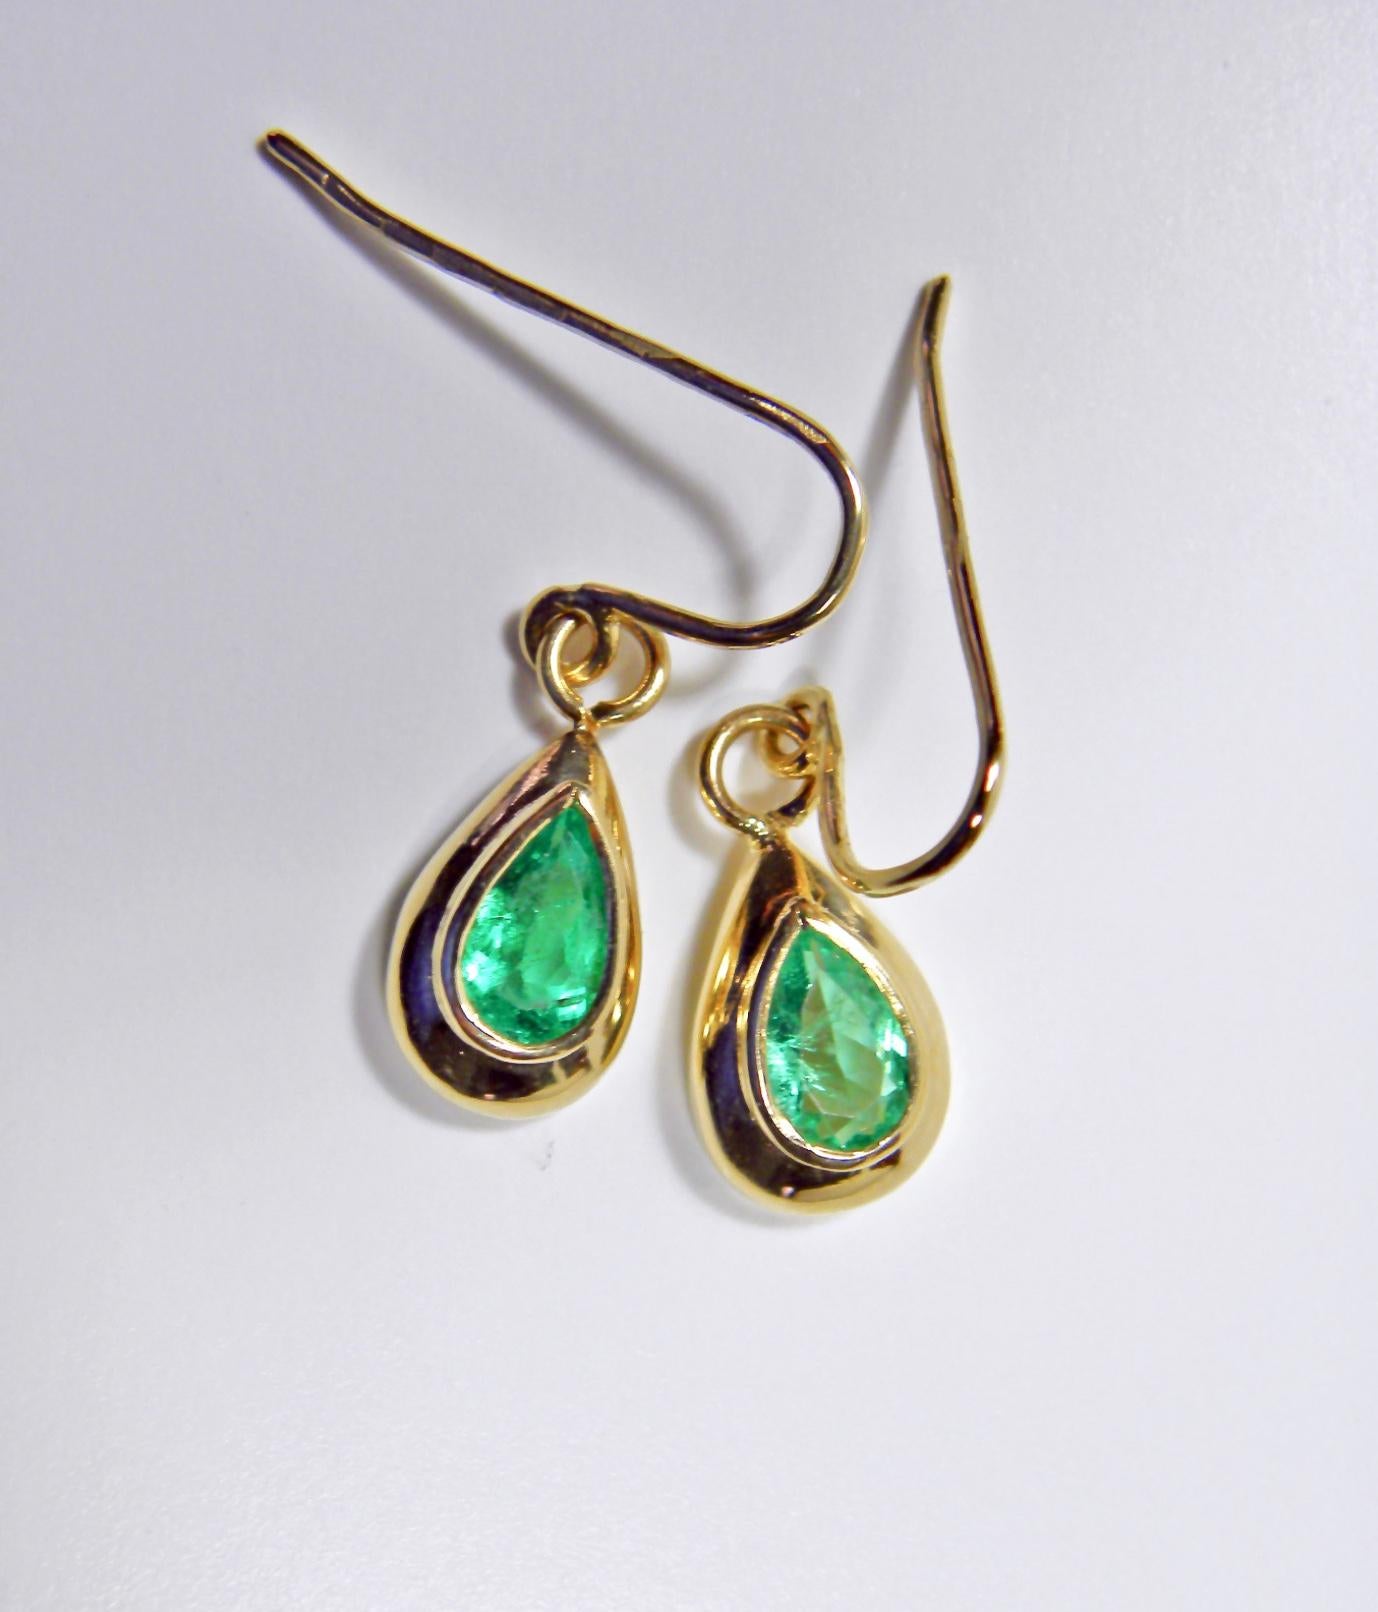 
Estate Beautiful 100% Natural Colombian Emeralds Dangles
Shape or Cut : Pear Cut
Average Color/Clarity :Medium-Light Green/ Clarity, VS
Total Weight Emeralds: Approx. 1.40 Carats (2 emeralds)
Total Gemstones Weight:  Approx. 1.40 carats
Emerald